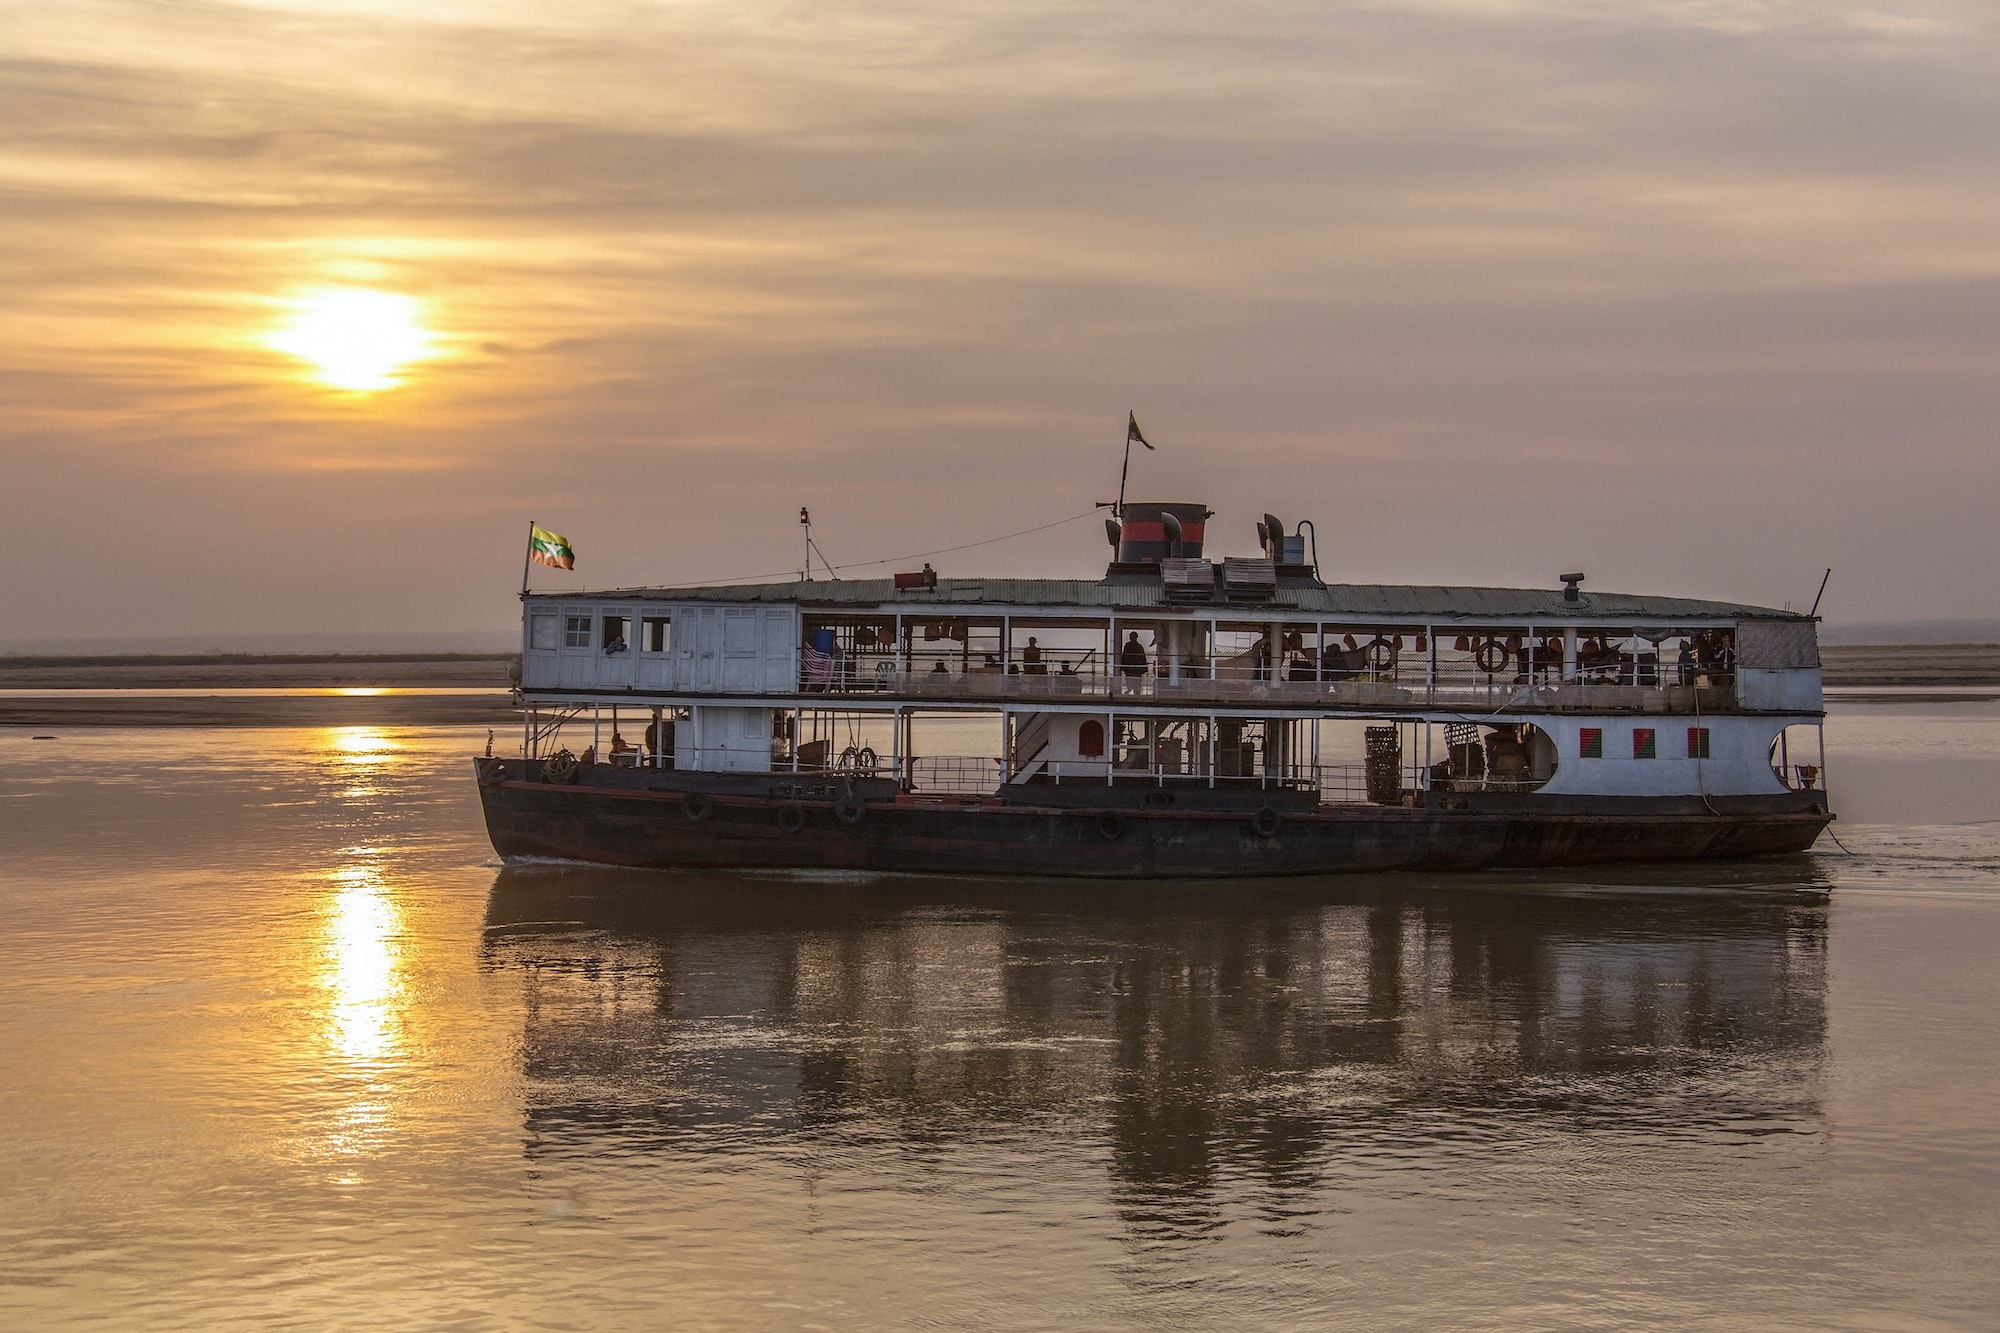 Old River Boat - Irrawaddy River - Myanmar